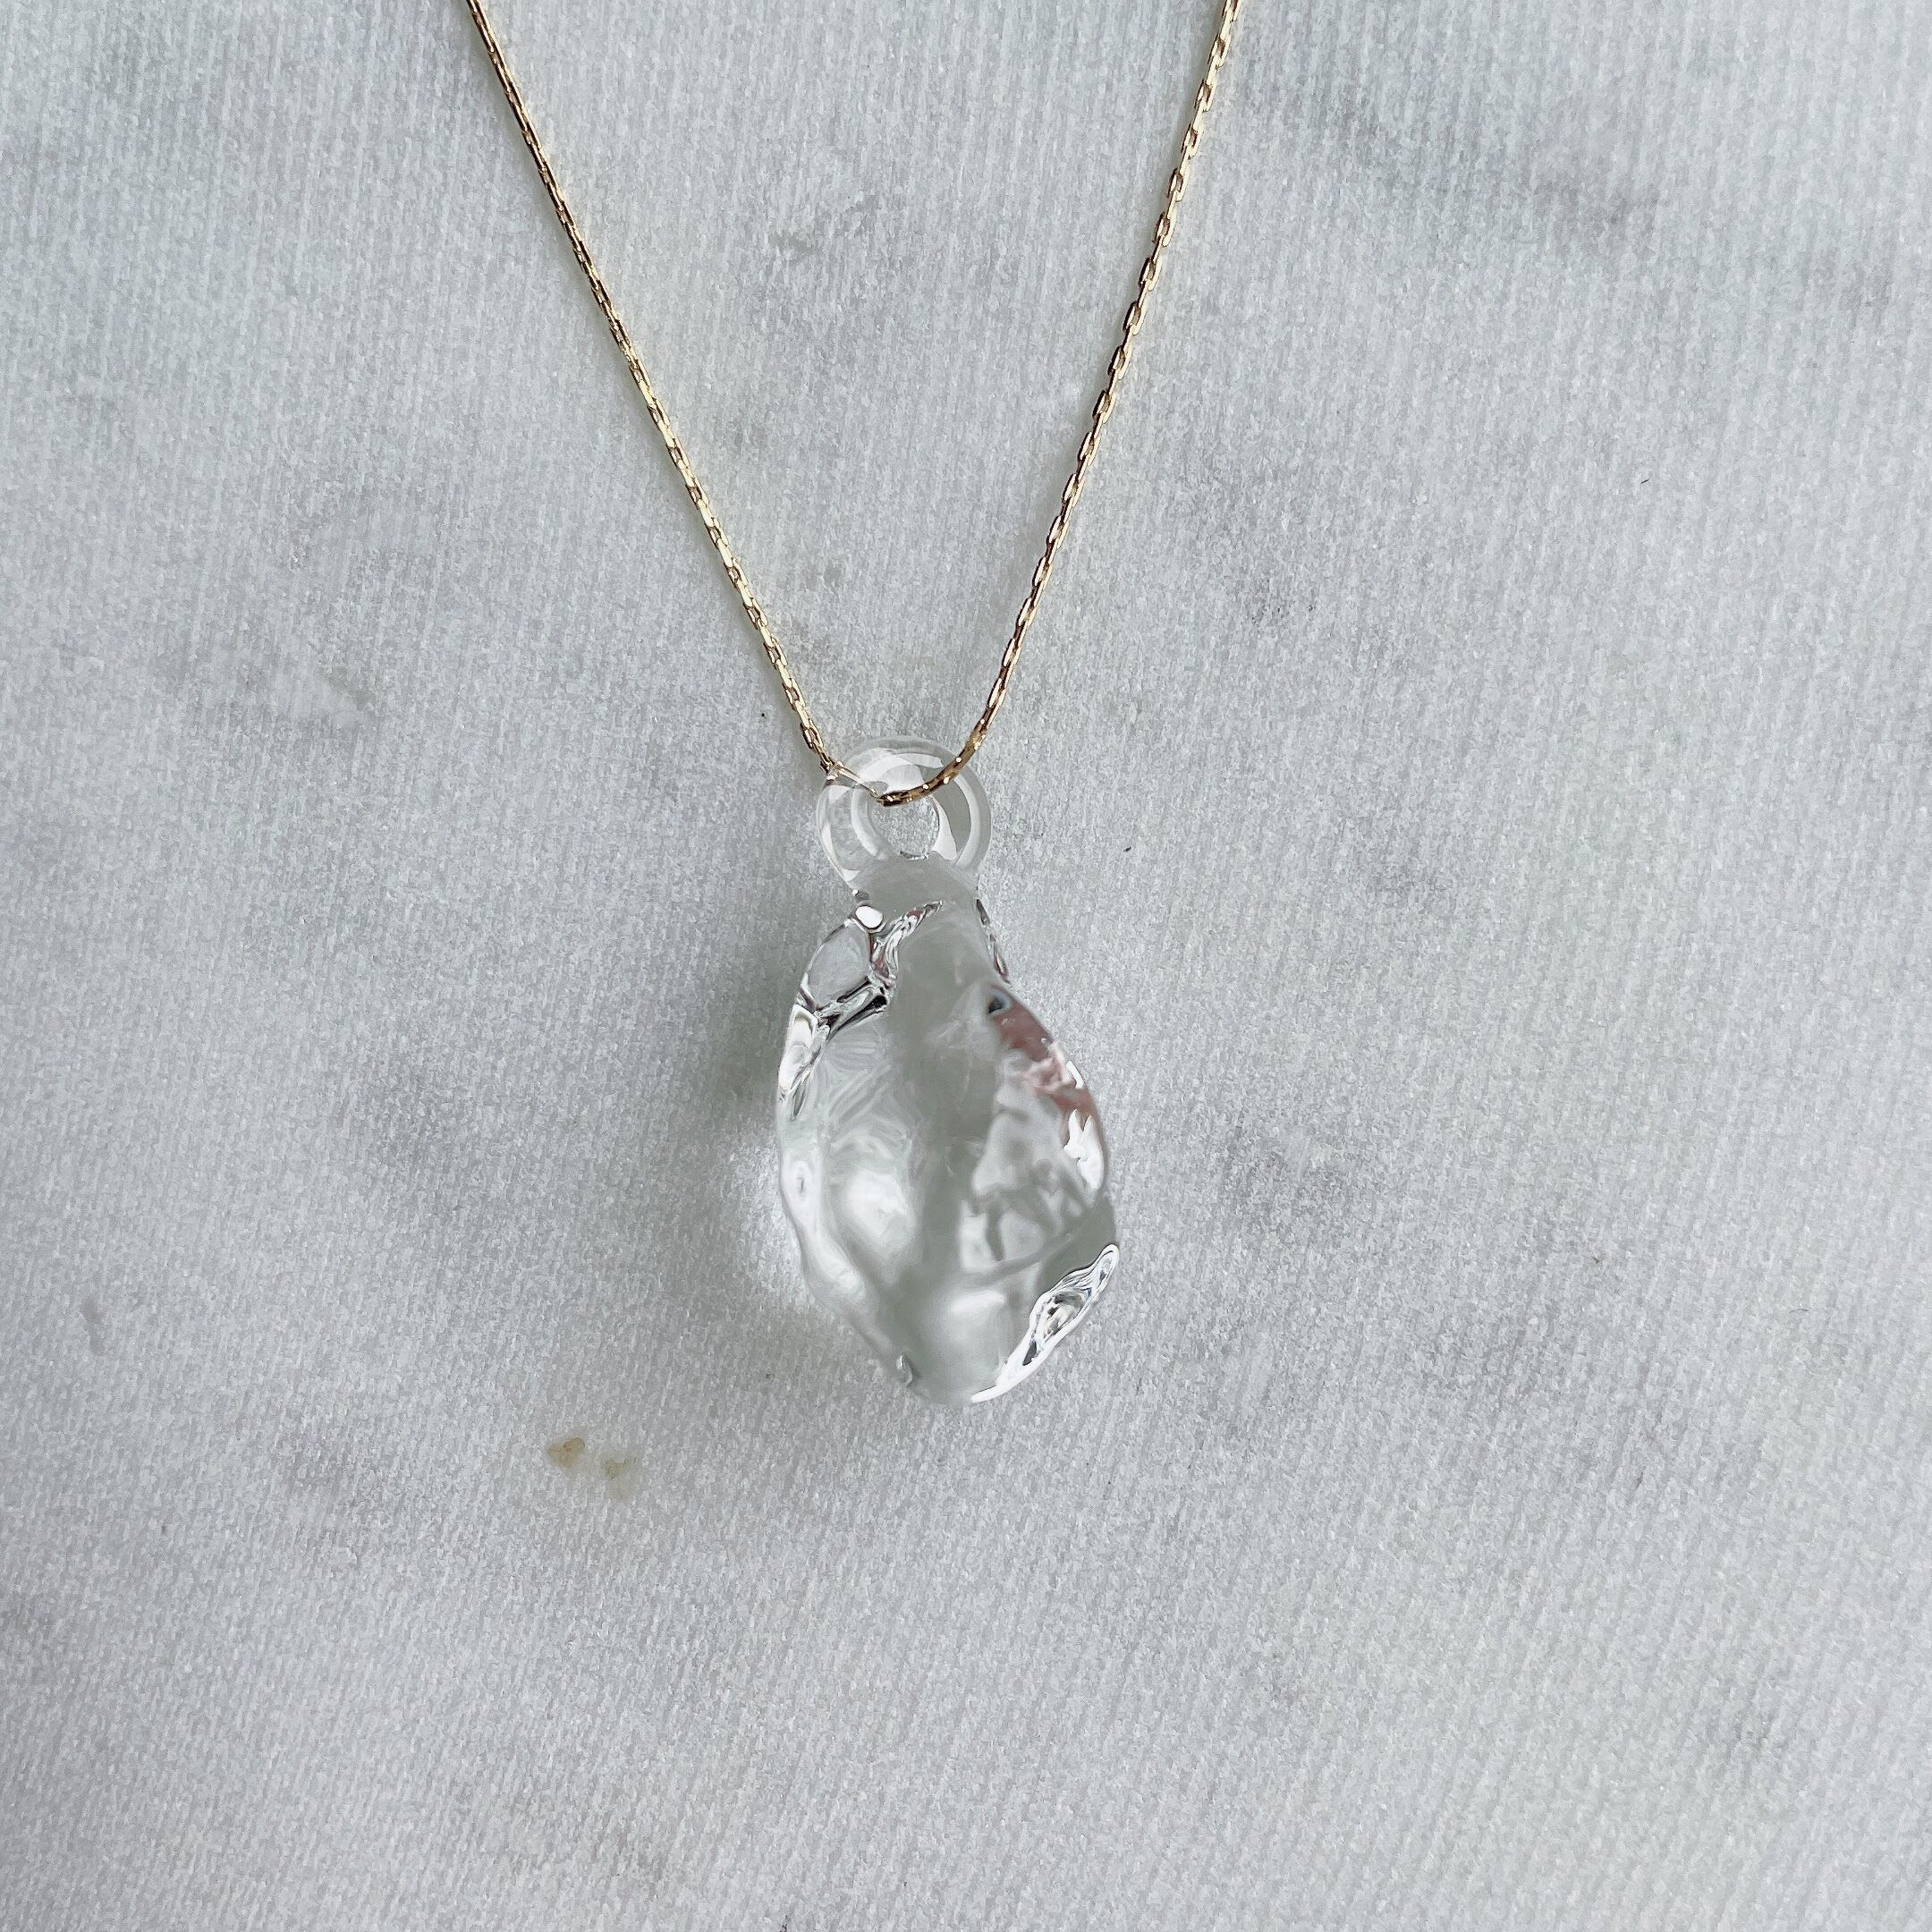 Glass Drop Necklace ガラスドロップネックレス | dix ONLINE STORE | ディスのアクセサリーオンラインショップ  powered by BASE